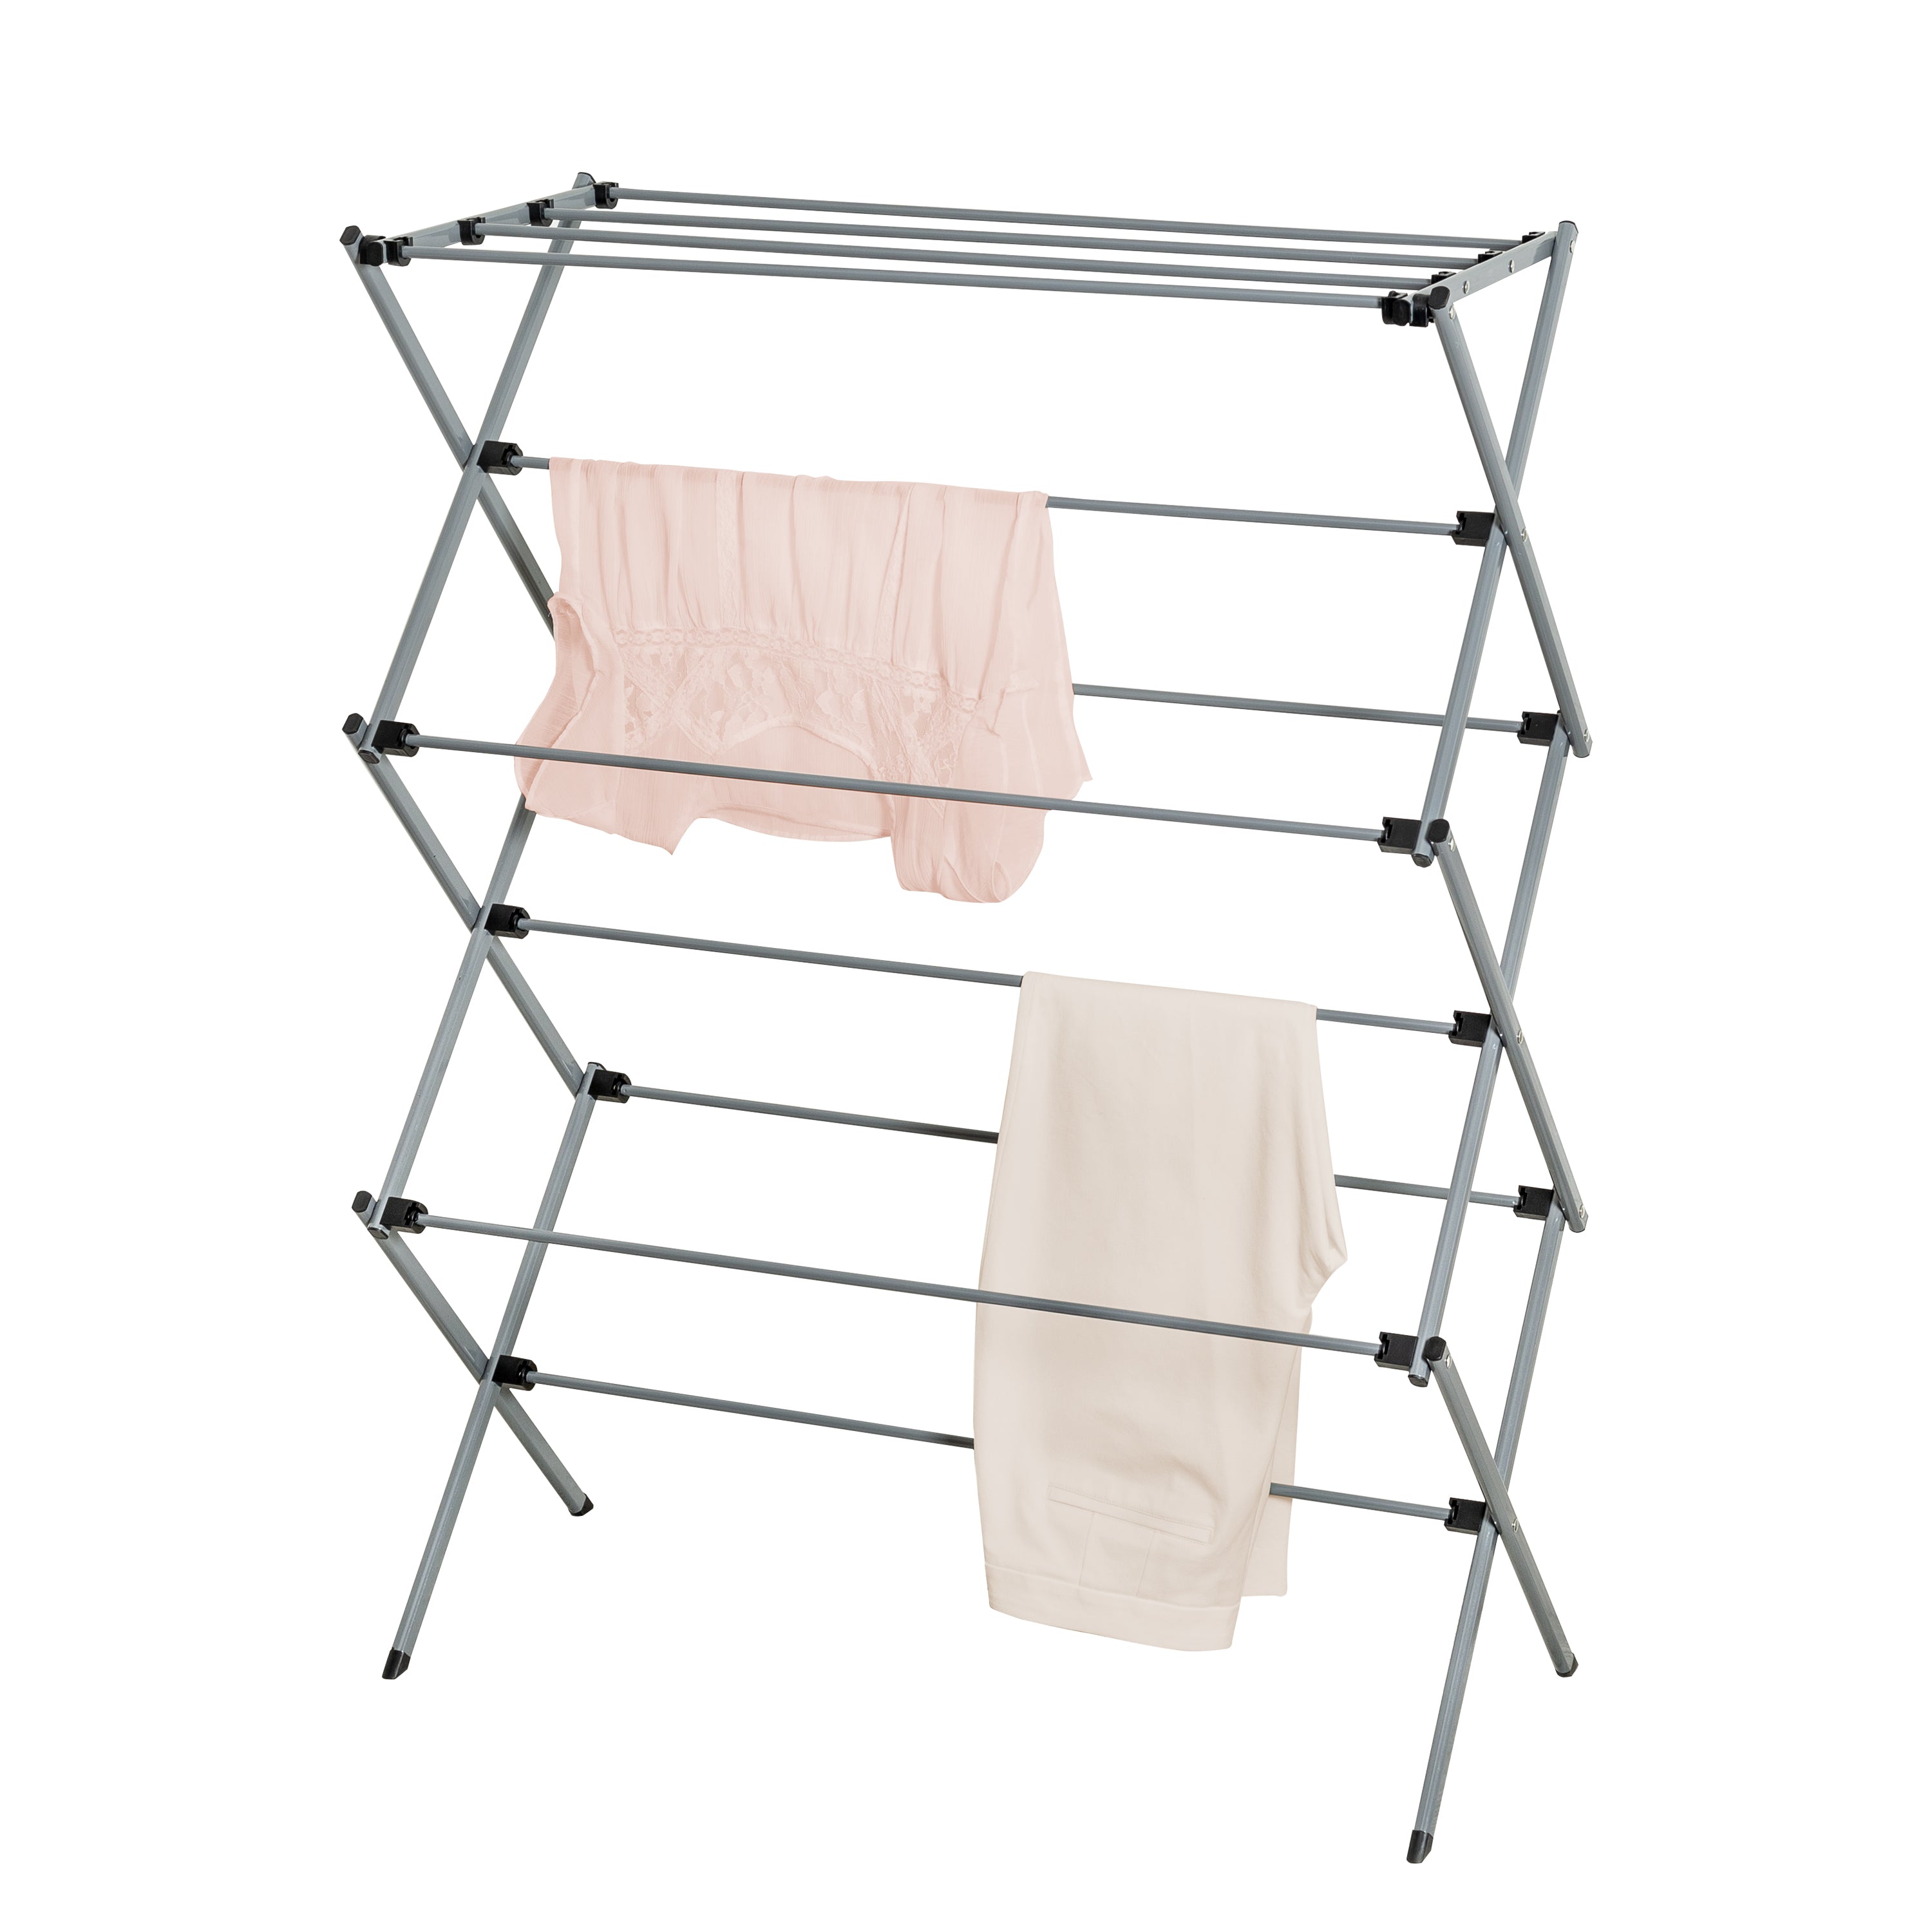 HYNAWIN Clothes Drying Racks, Upgraded Stainless Steel Laundry Drying Rack, Heavy  Duty Collapsible Clothes Storage Rack for Indoor Outd